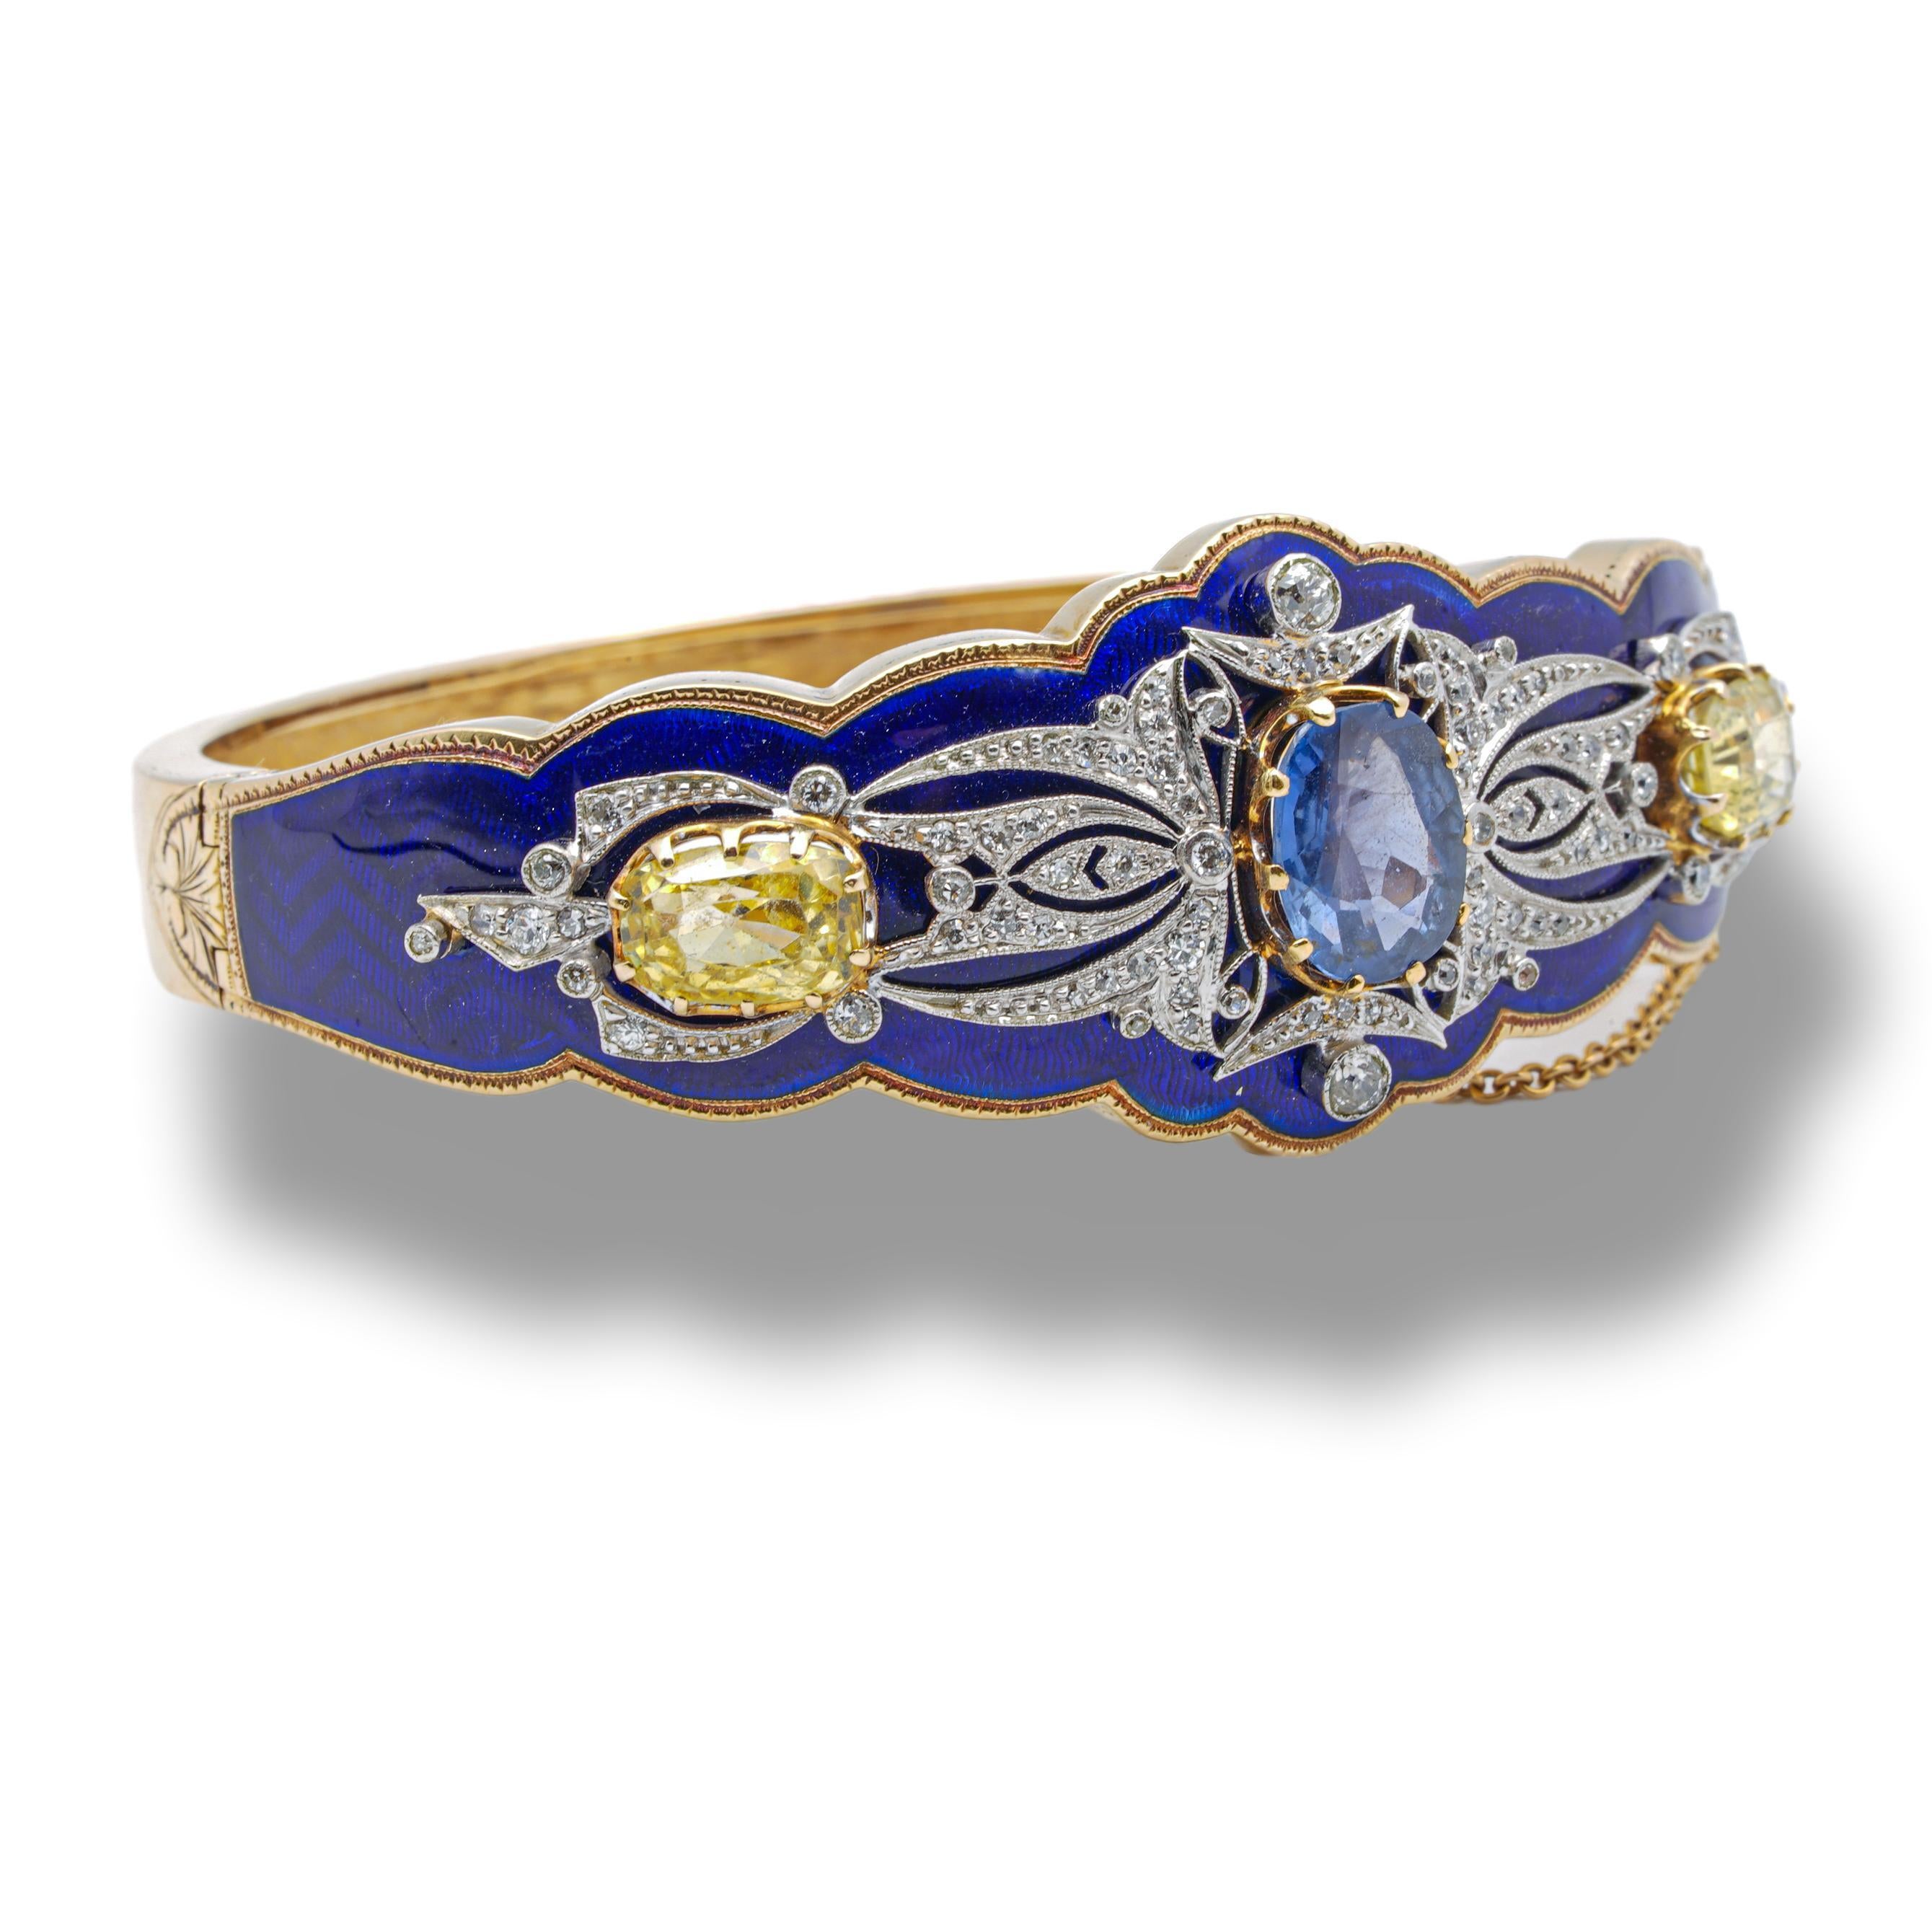 Vintage bangle bracelet finely crafted in 14 Karat Gold featuring an exquisite Royal blue enamel finish and a mix of blue and yellow sapphires. One center oval blue sapphire weighs 3.48 cts and is certified by AGL ( American Gemological